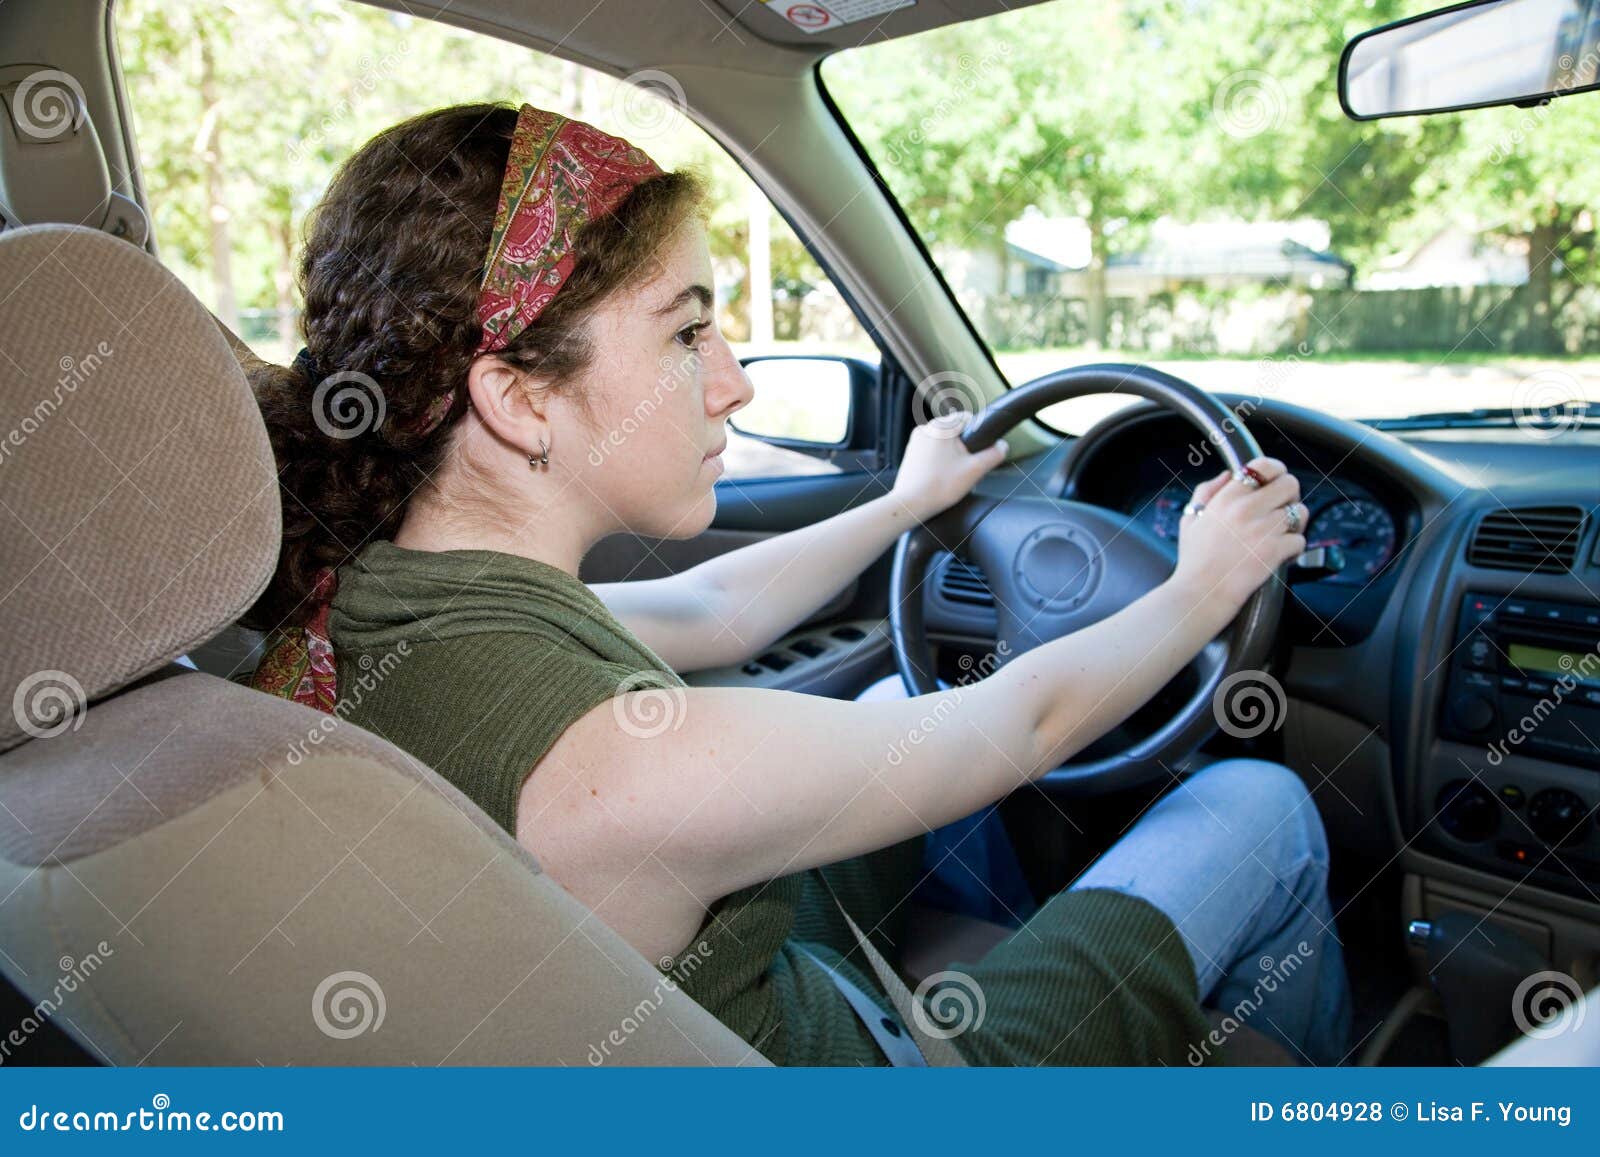 Teen Driving Here Are Ways 64